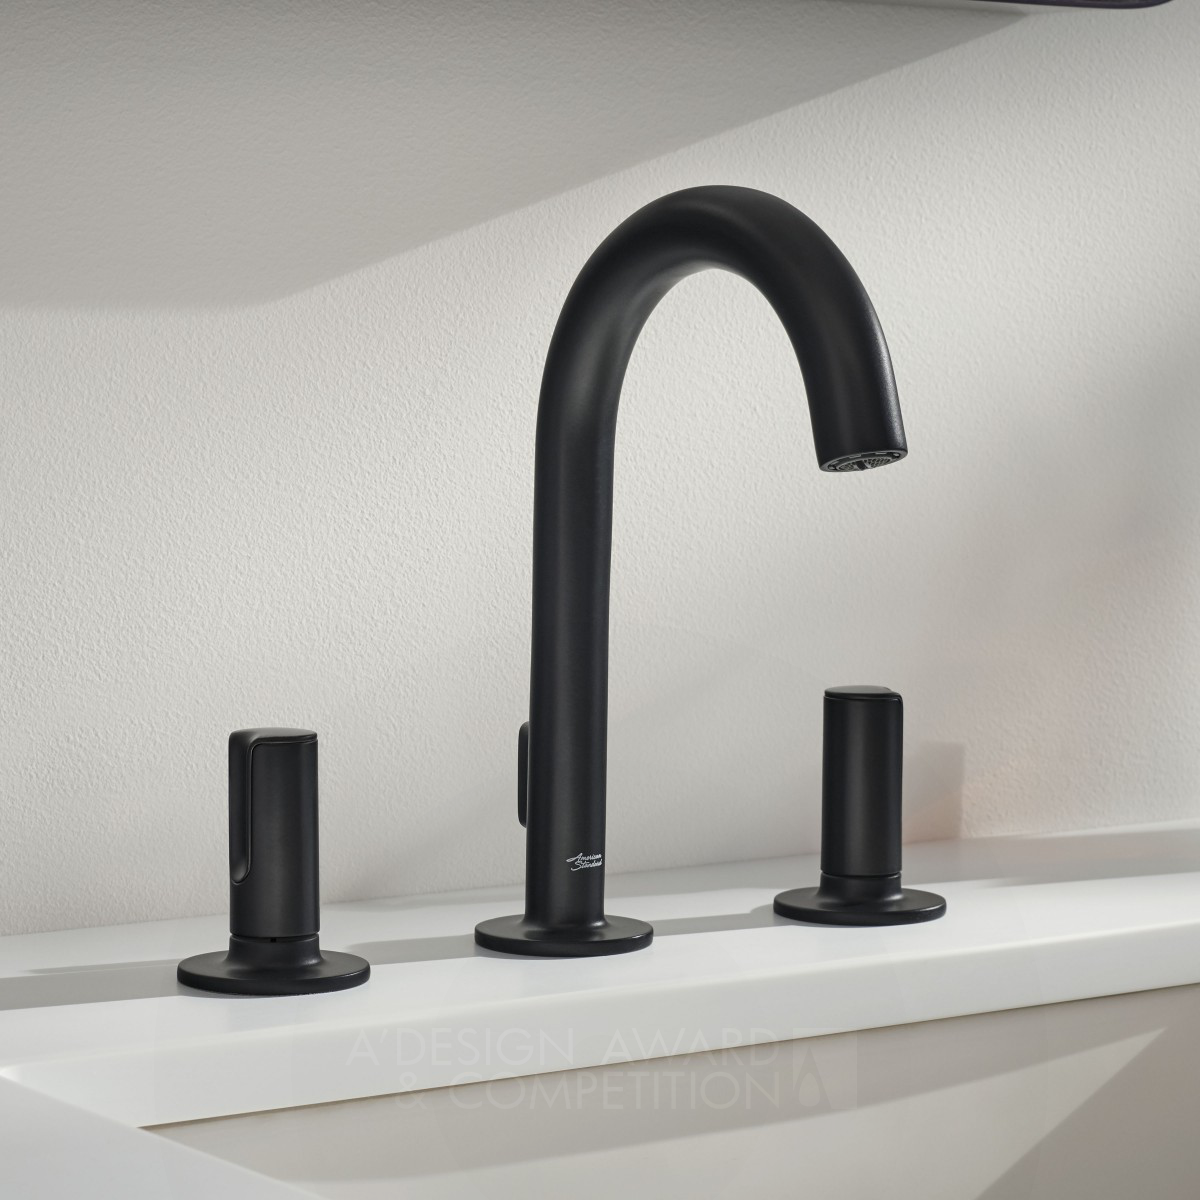 Good Bathroom Faucets and Accessories Design